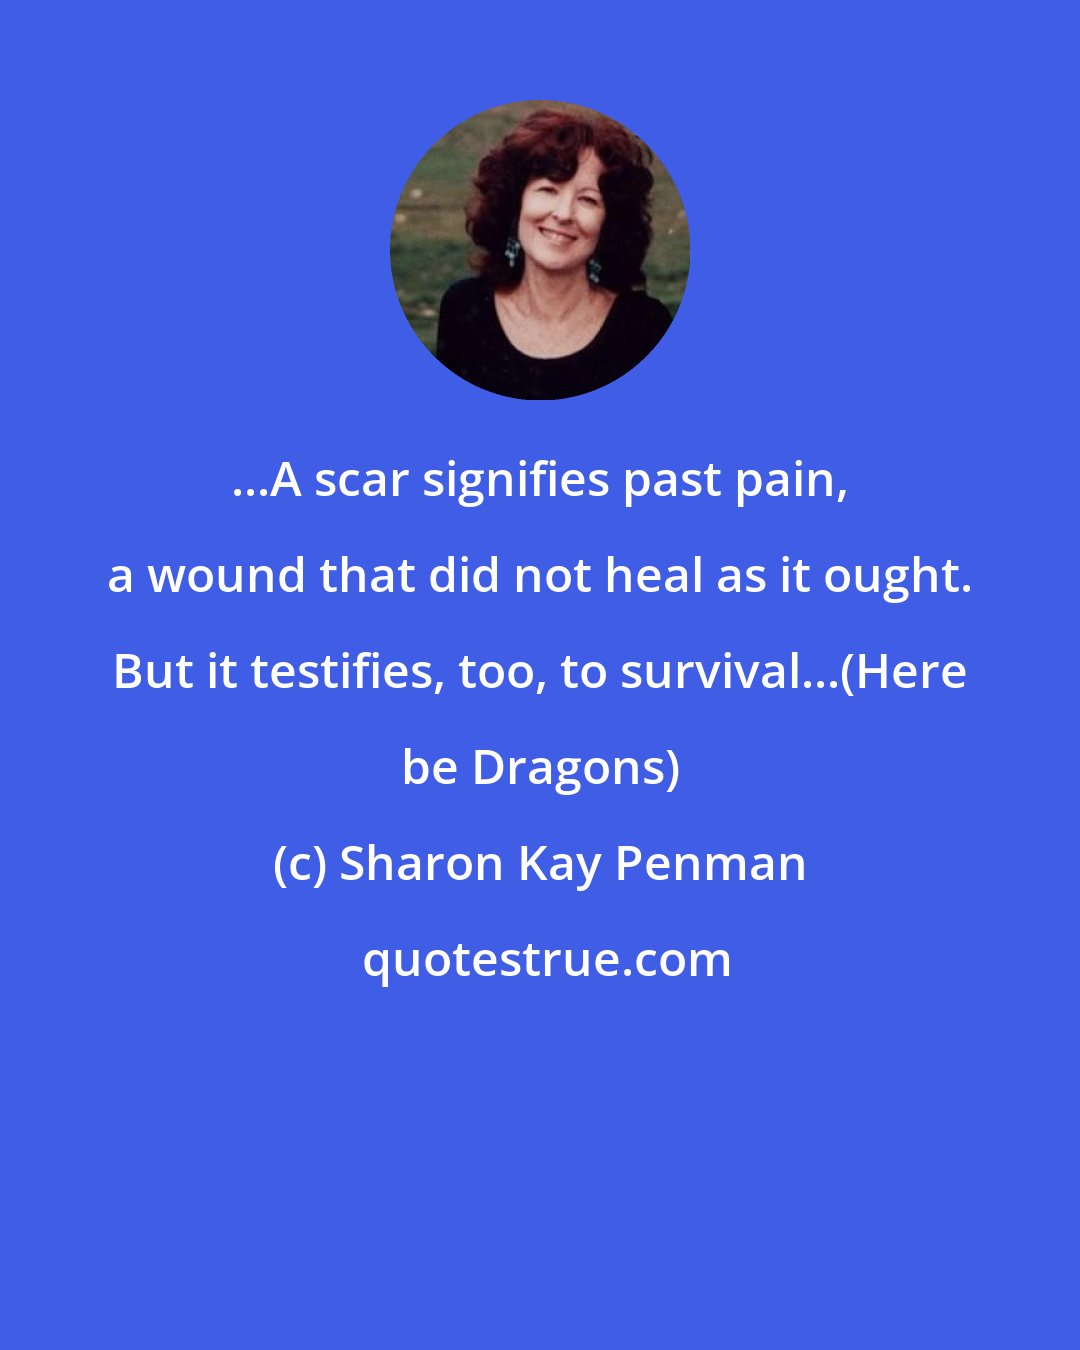 Sharon Kay Penman: ...A scar signifies past pain, a wound that did not heal as it ought. But it testifies, too, to survival...(Here be Dragons)